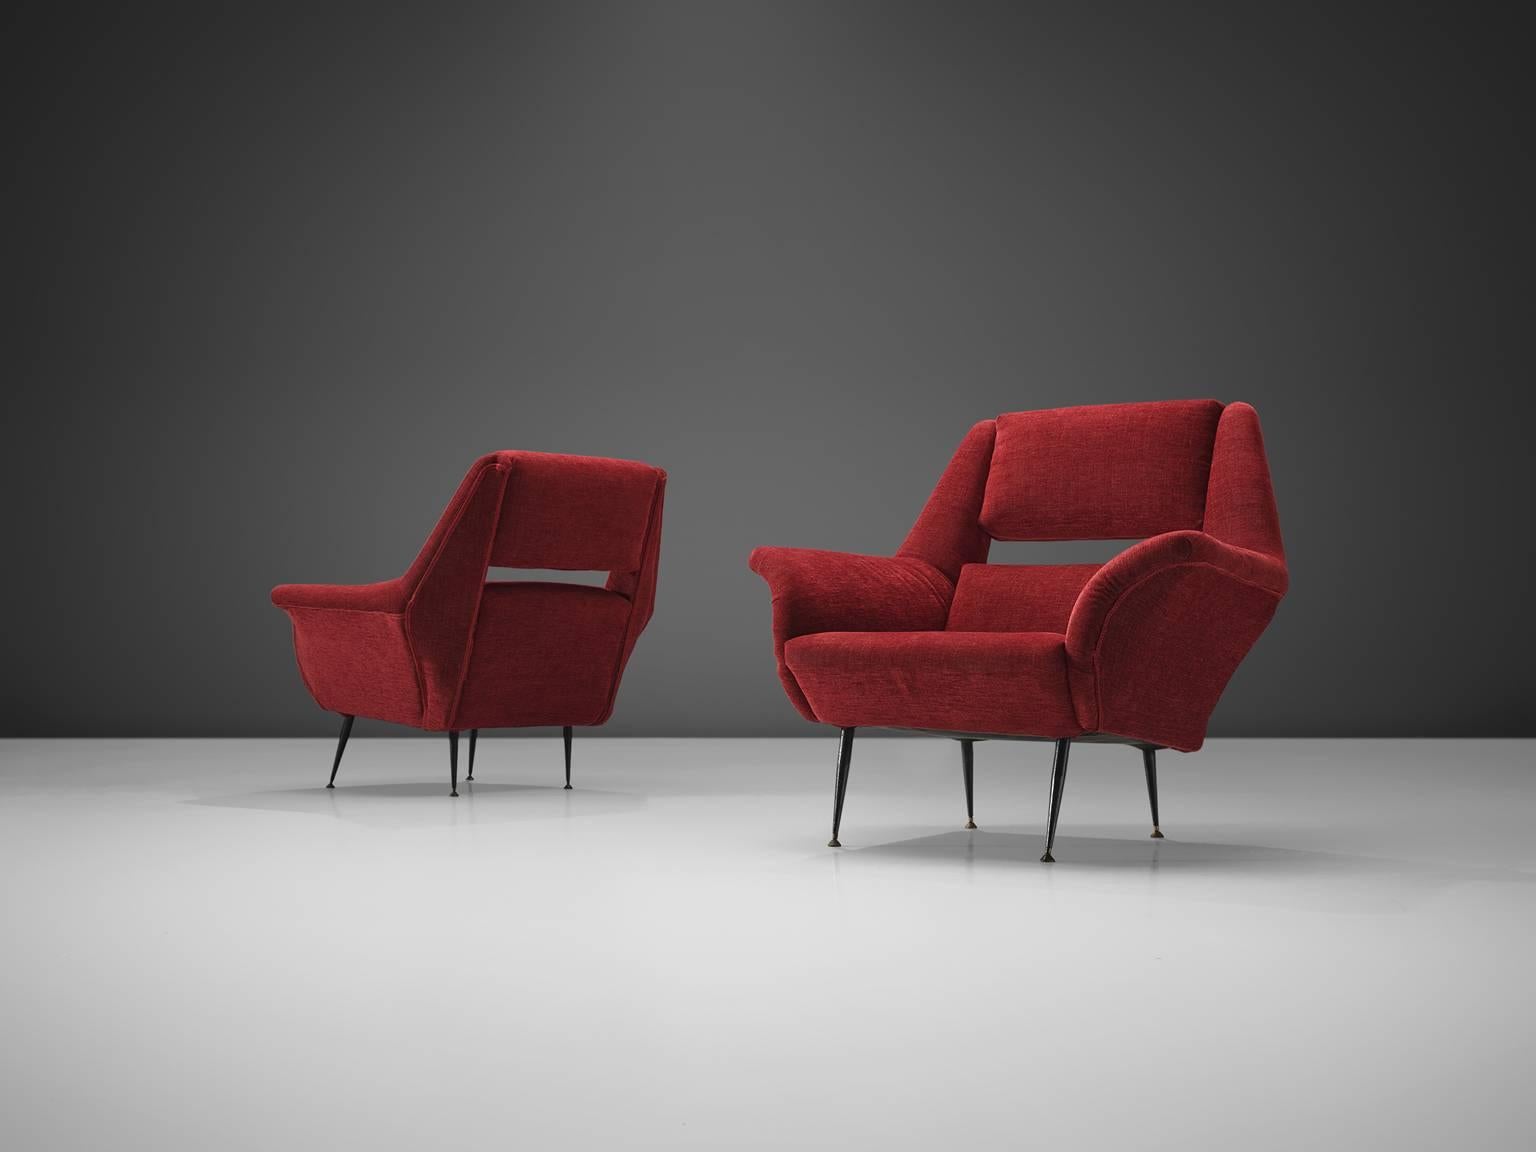 Italian lounge chairs, red fabric, metal legs, brass feet, Italy, 1950s.

These chairs are iconic examples of Italian design from the 1950s. The design is on the one hand simplistic, with elegant, subtle lines. On the other hand the set has a